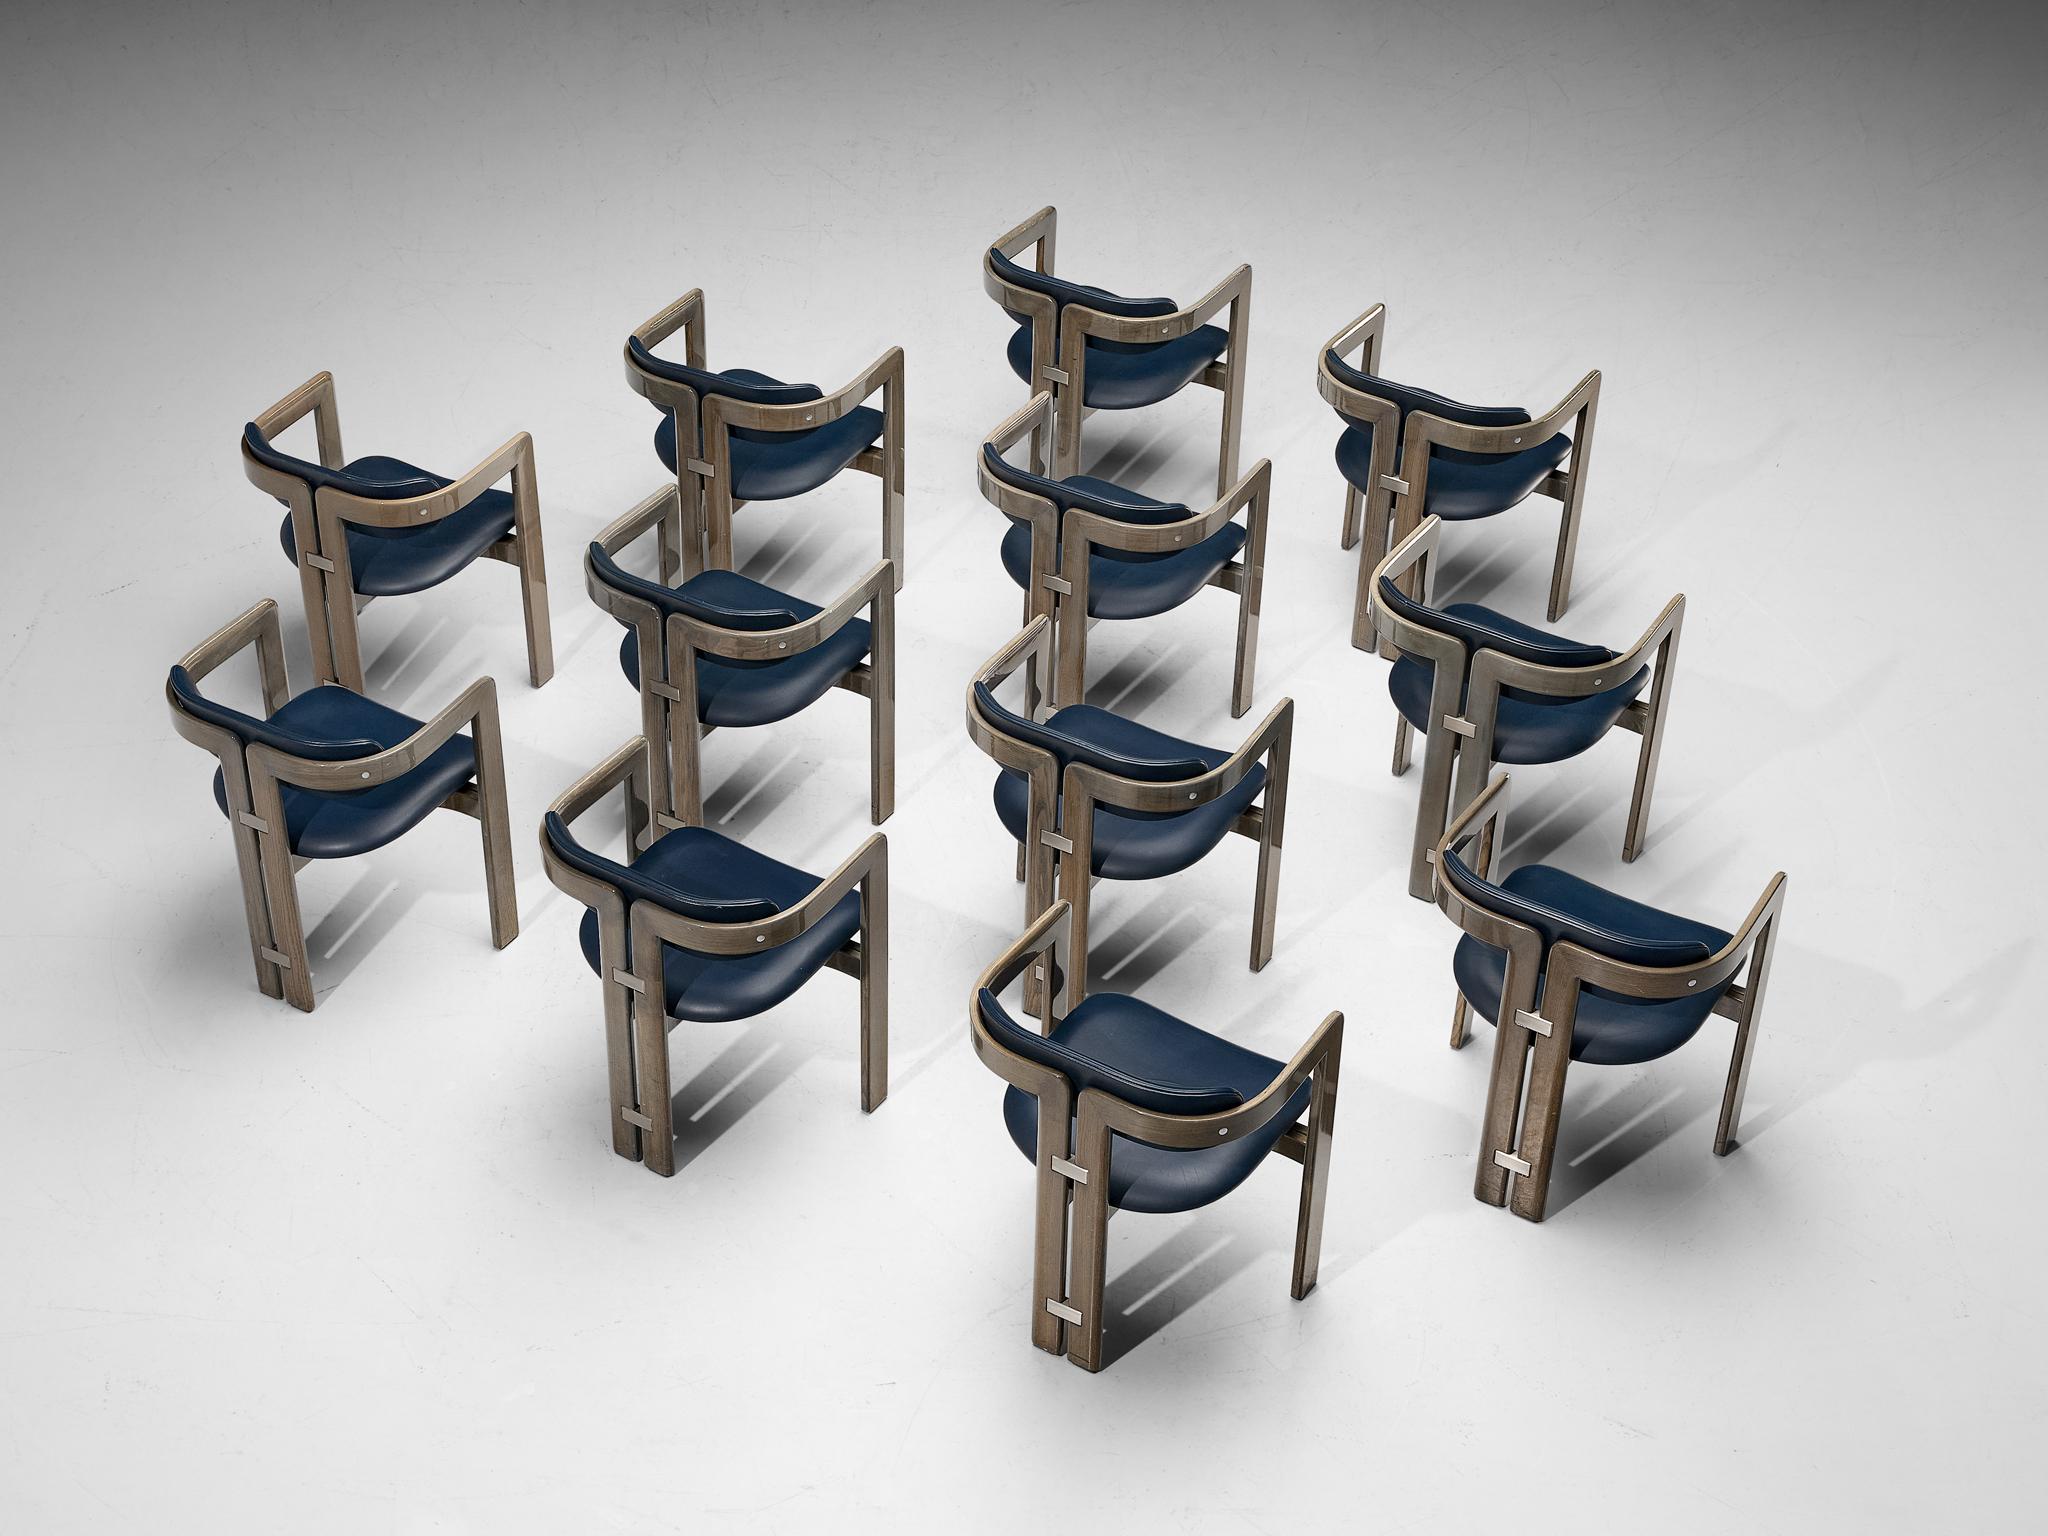 Augusto Savini for Pozzi, set of twelve 'Pamplona' dining chairs, oak, blue leather upholstery, aluminum, Italy, 1965.

Set of twelve armchairs in walnut and bue leather upholstery. A characteristic design; simplistic yet very strong in lines and